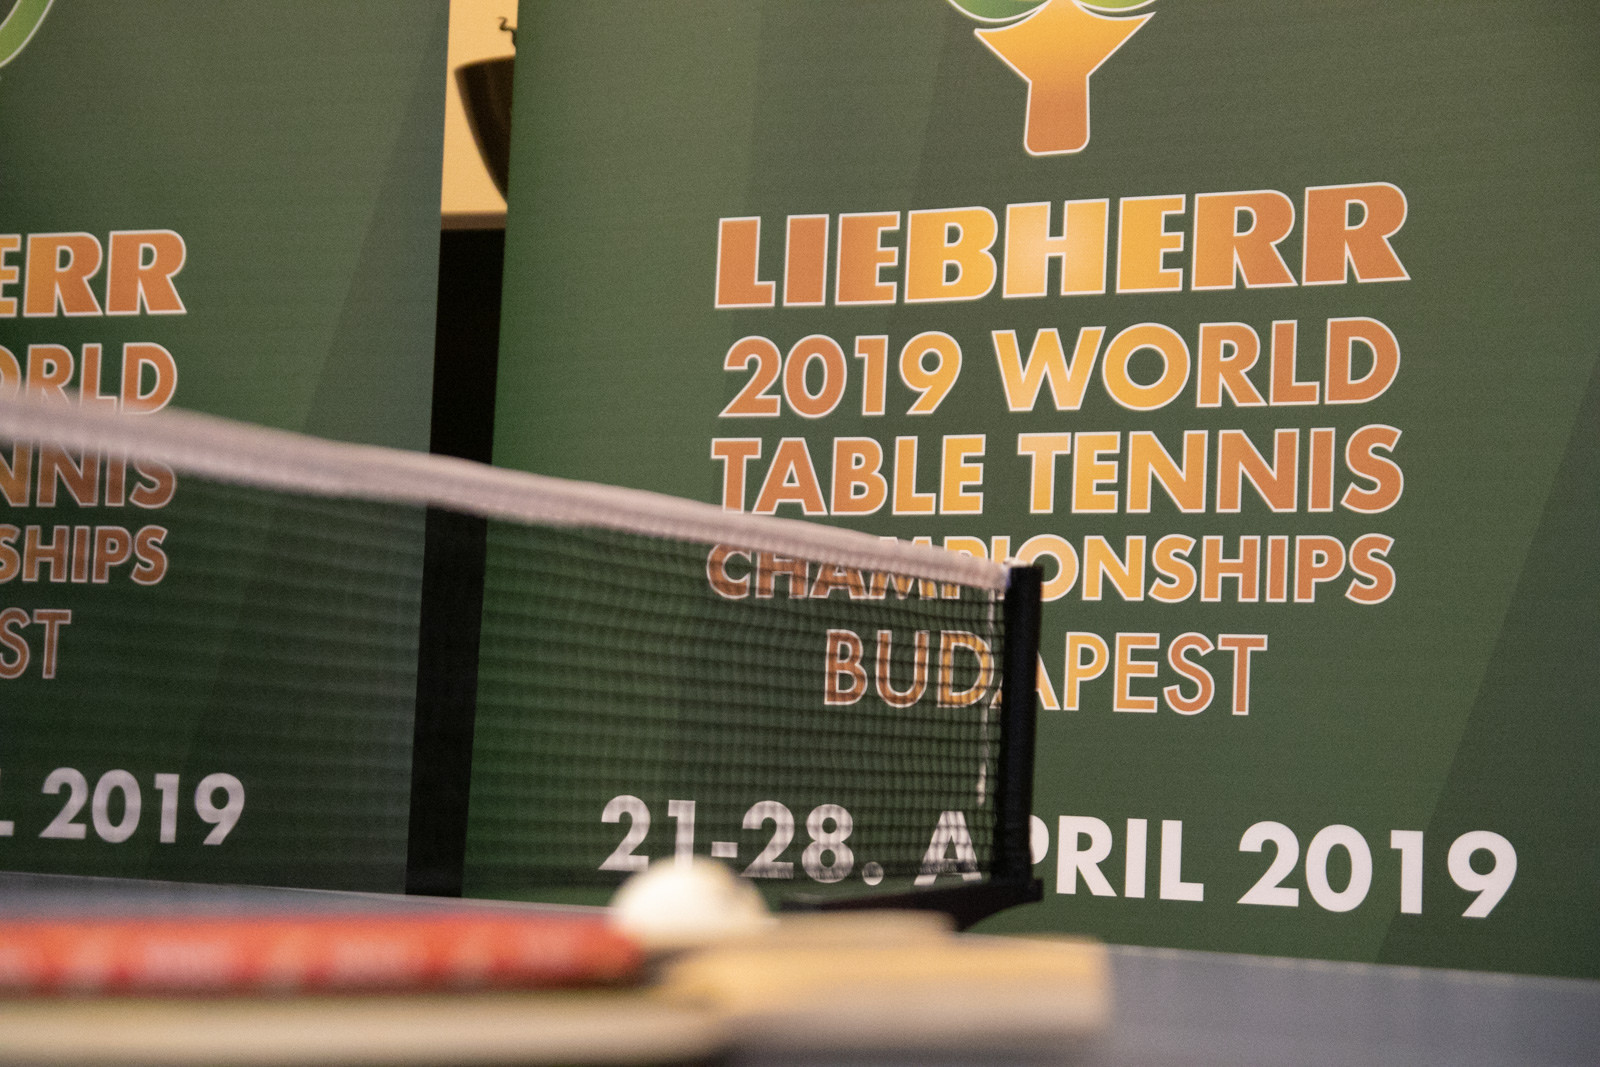 The ITTF World Championships starting in Budapest today will see the Chinese favourites in men's and women's competition facing unusually strong challenges ©ITTF